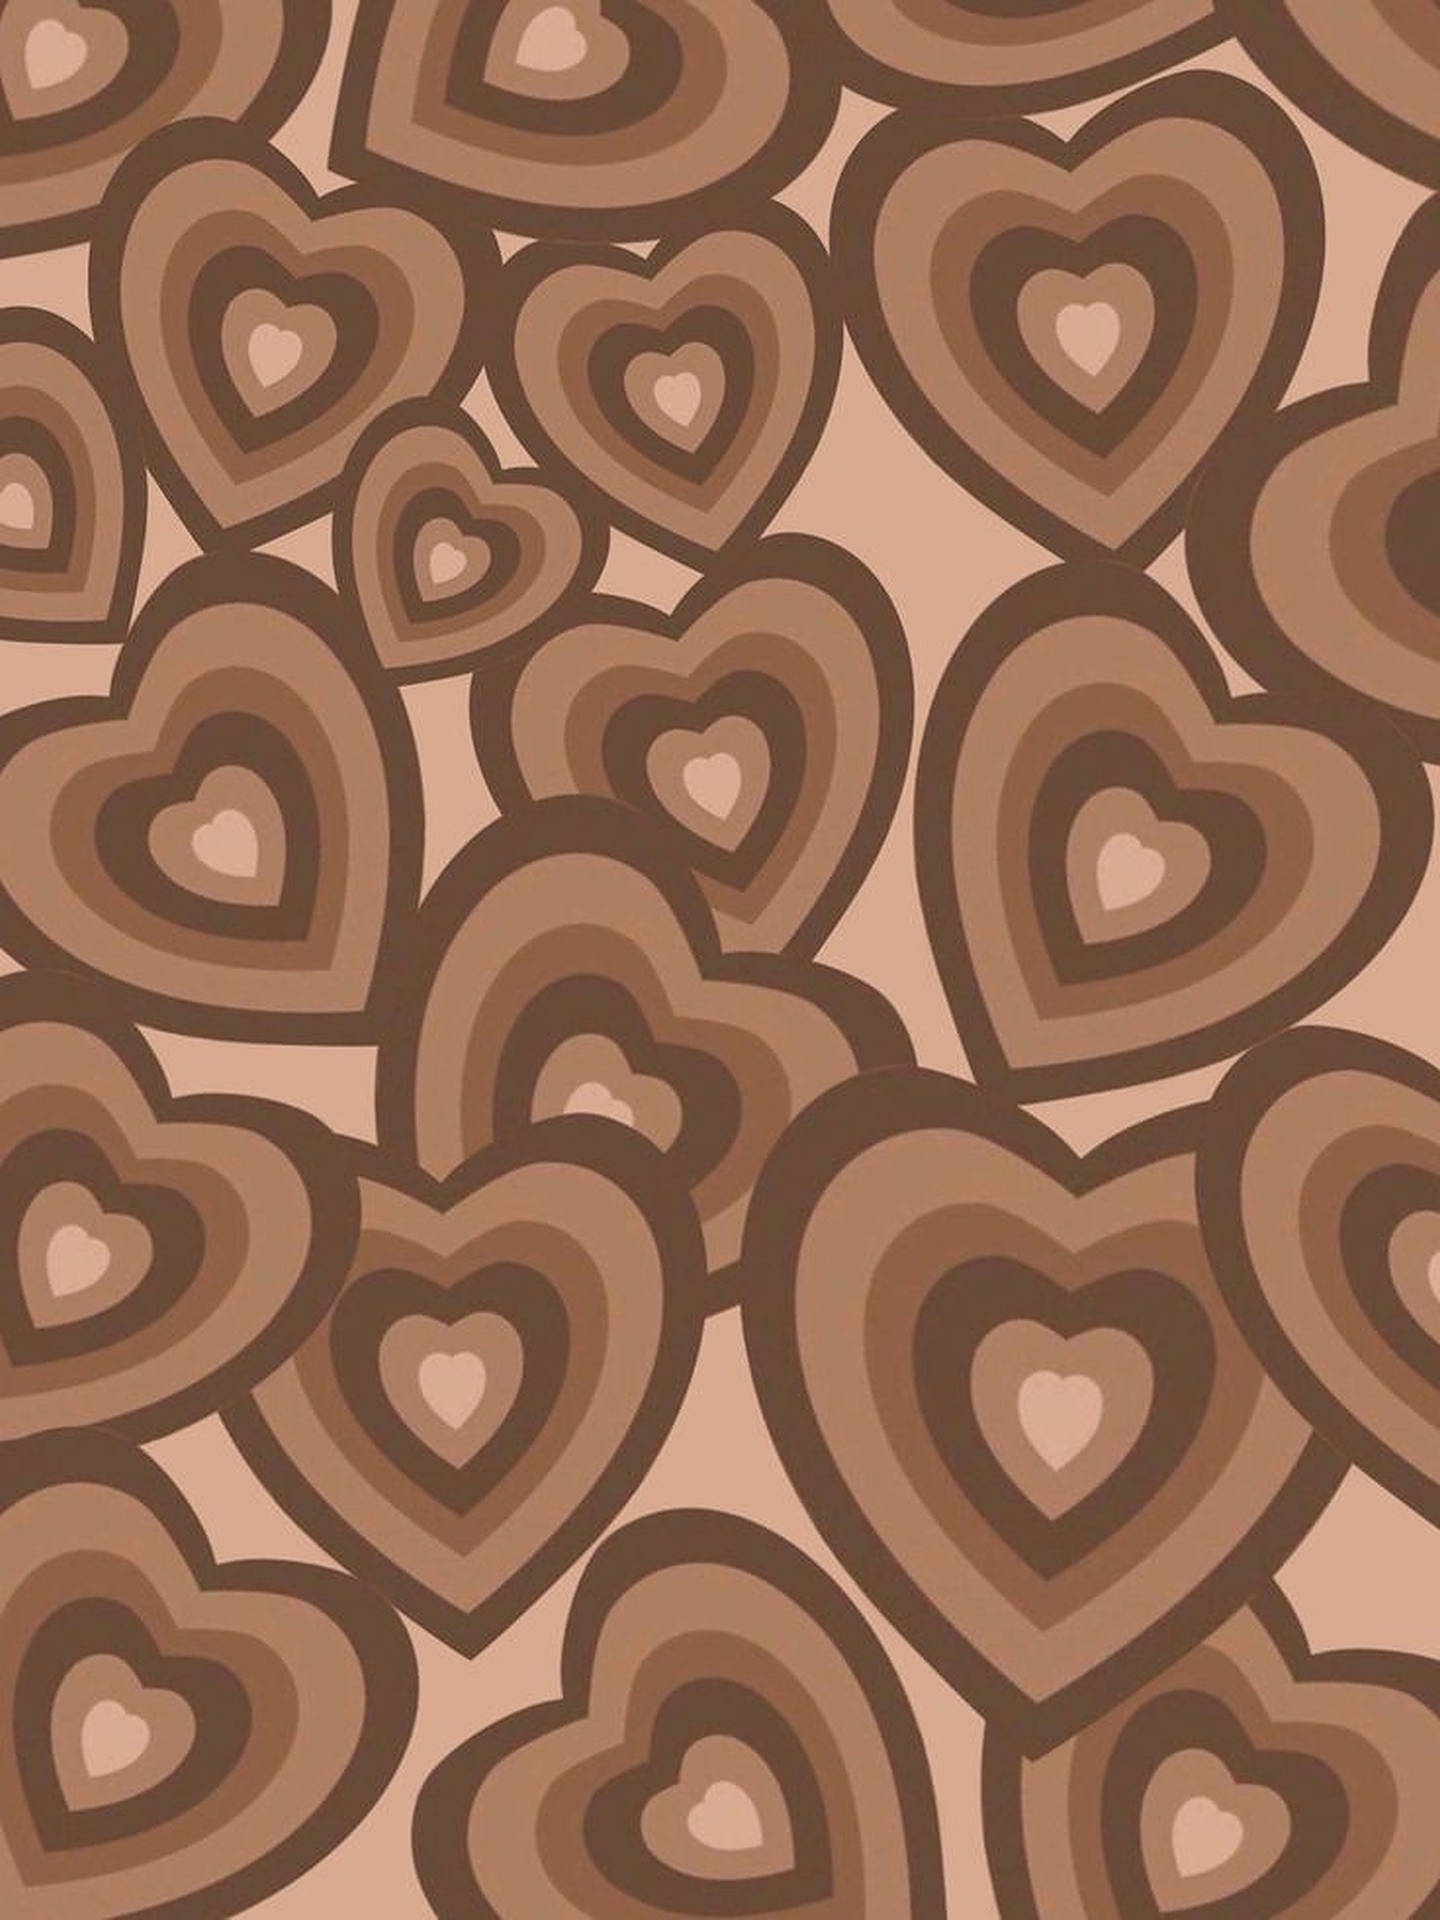 Brown Heart Wallpaper Full HD, 4K Free to Use